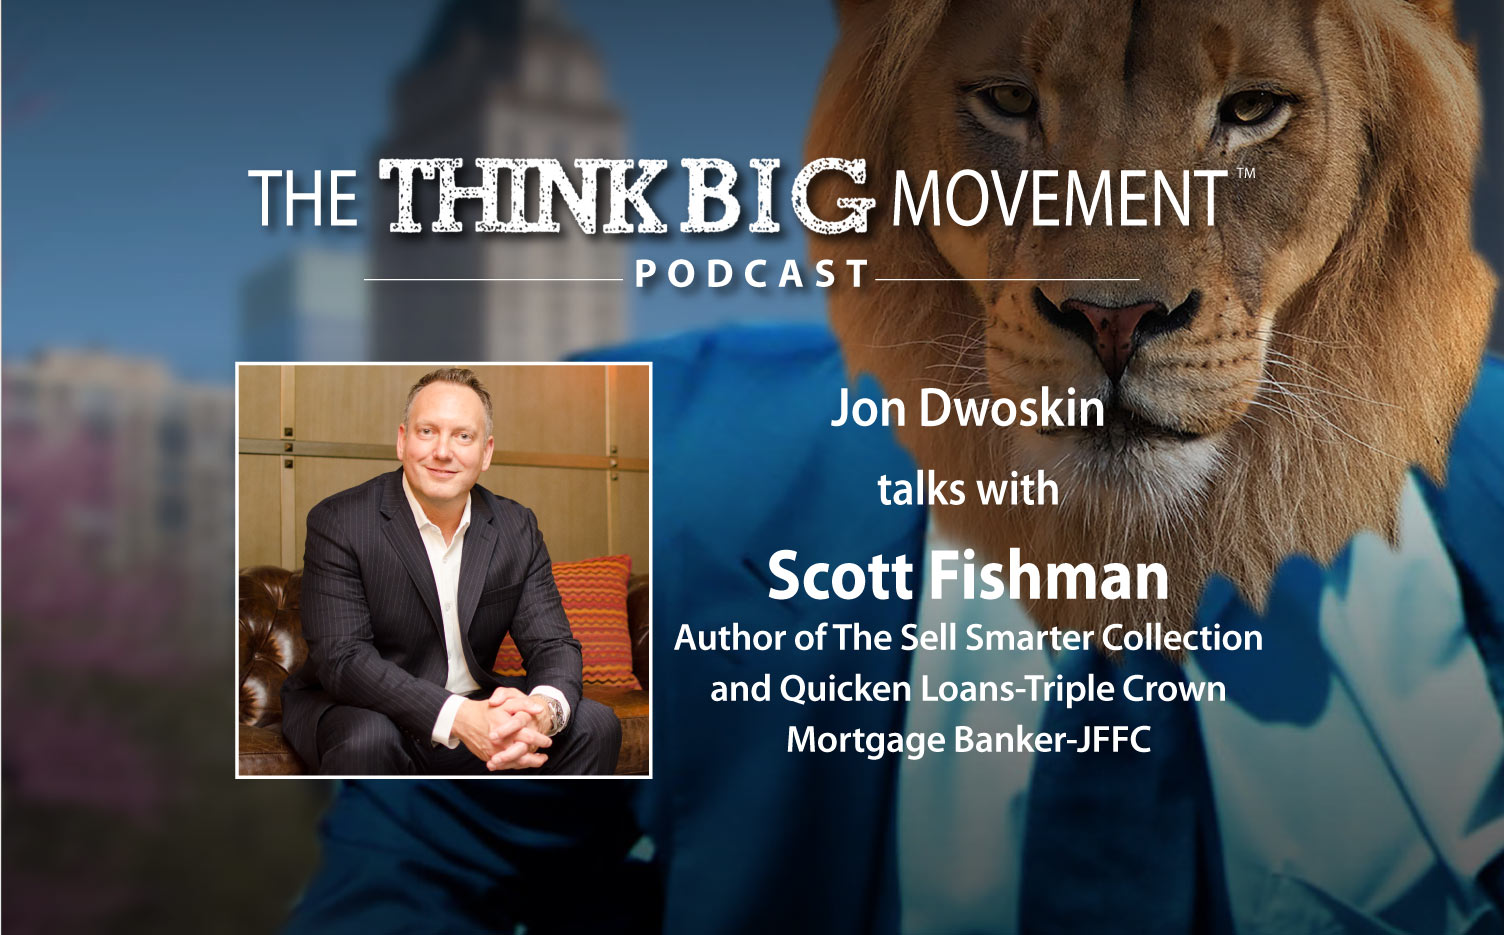 The Think Big Podcast - Jon Dwoskin Interviews Scott Fishman, Author of The Sell Smarter Collection, Quicken Loans-Triple Crown Mortgage Banker-JFFC